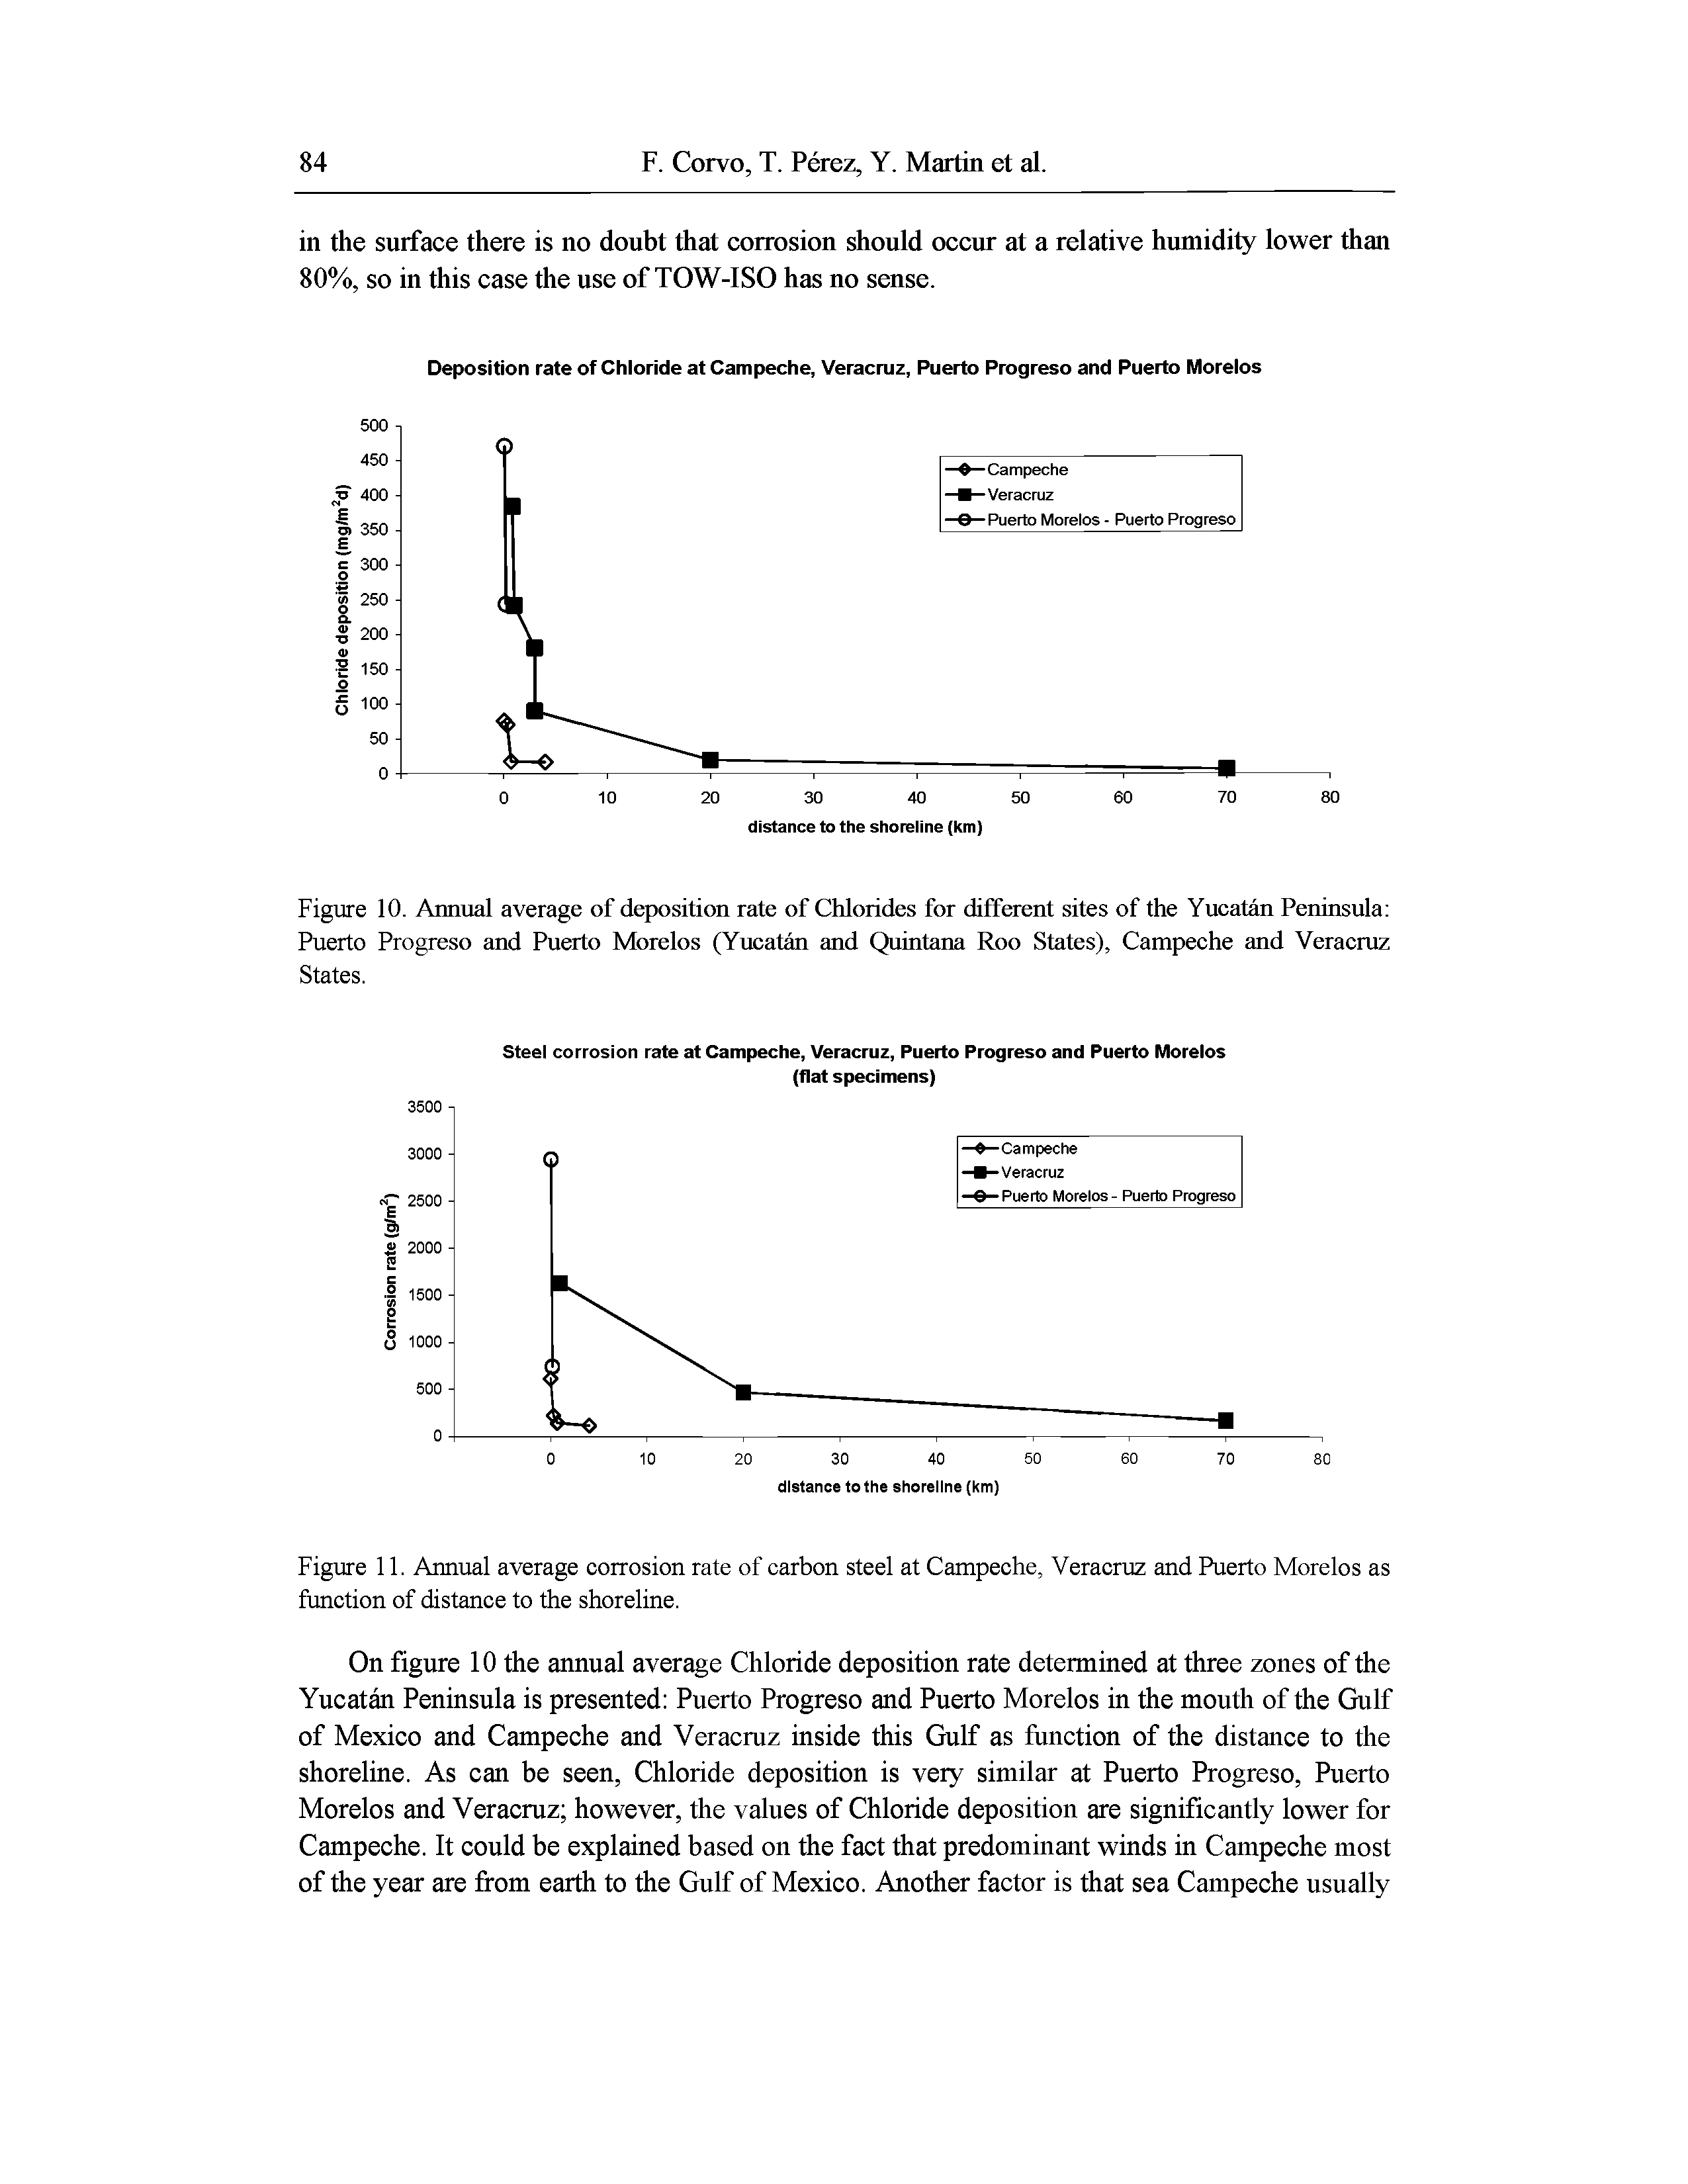 Figure 11. Annual average corrosion rate of carbon steel at Campeche, Veracruz and Puerto Morelos as function of distance to the shoreline.